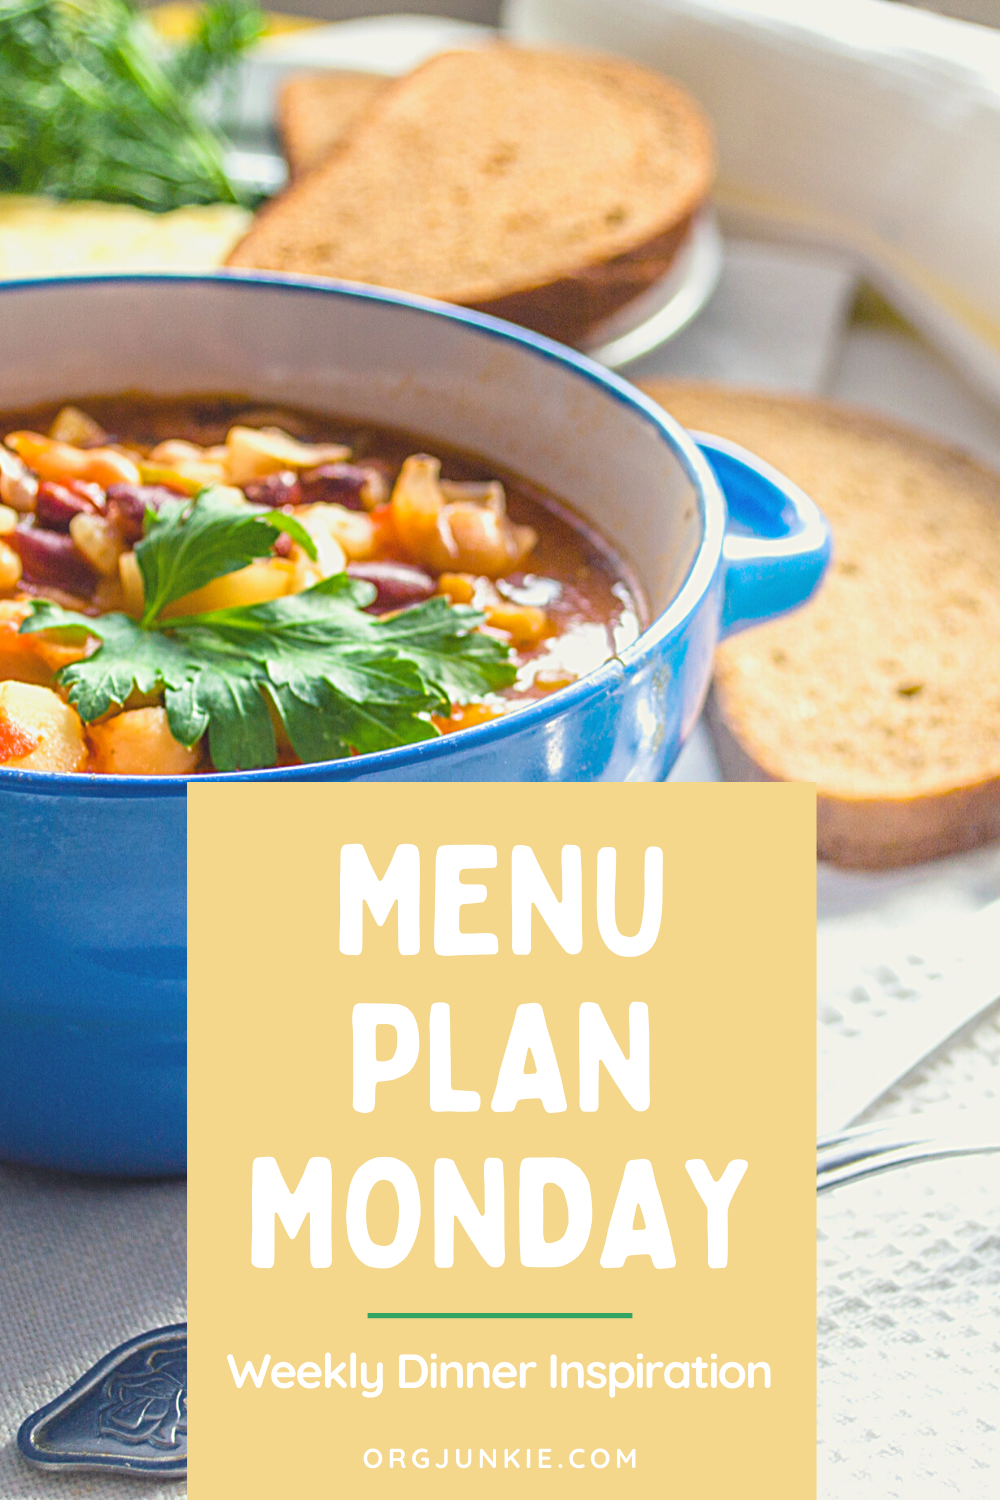 Menu Plan Monday for the week of Aug 31/20 ~ Weekly Dinner Inspiration at I'm an Organizing Junkie